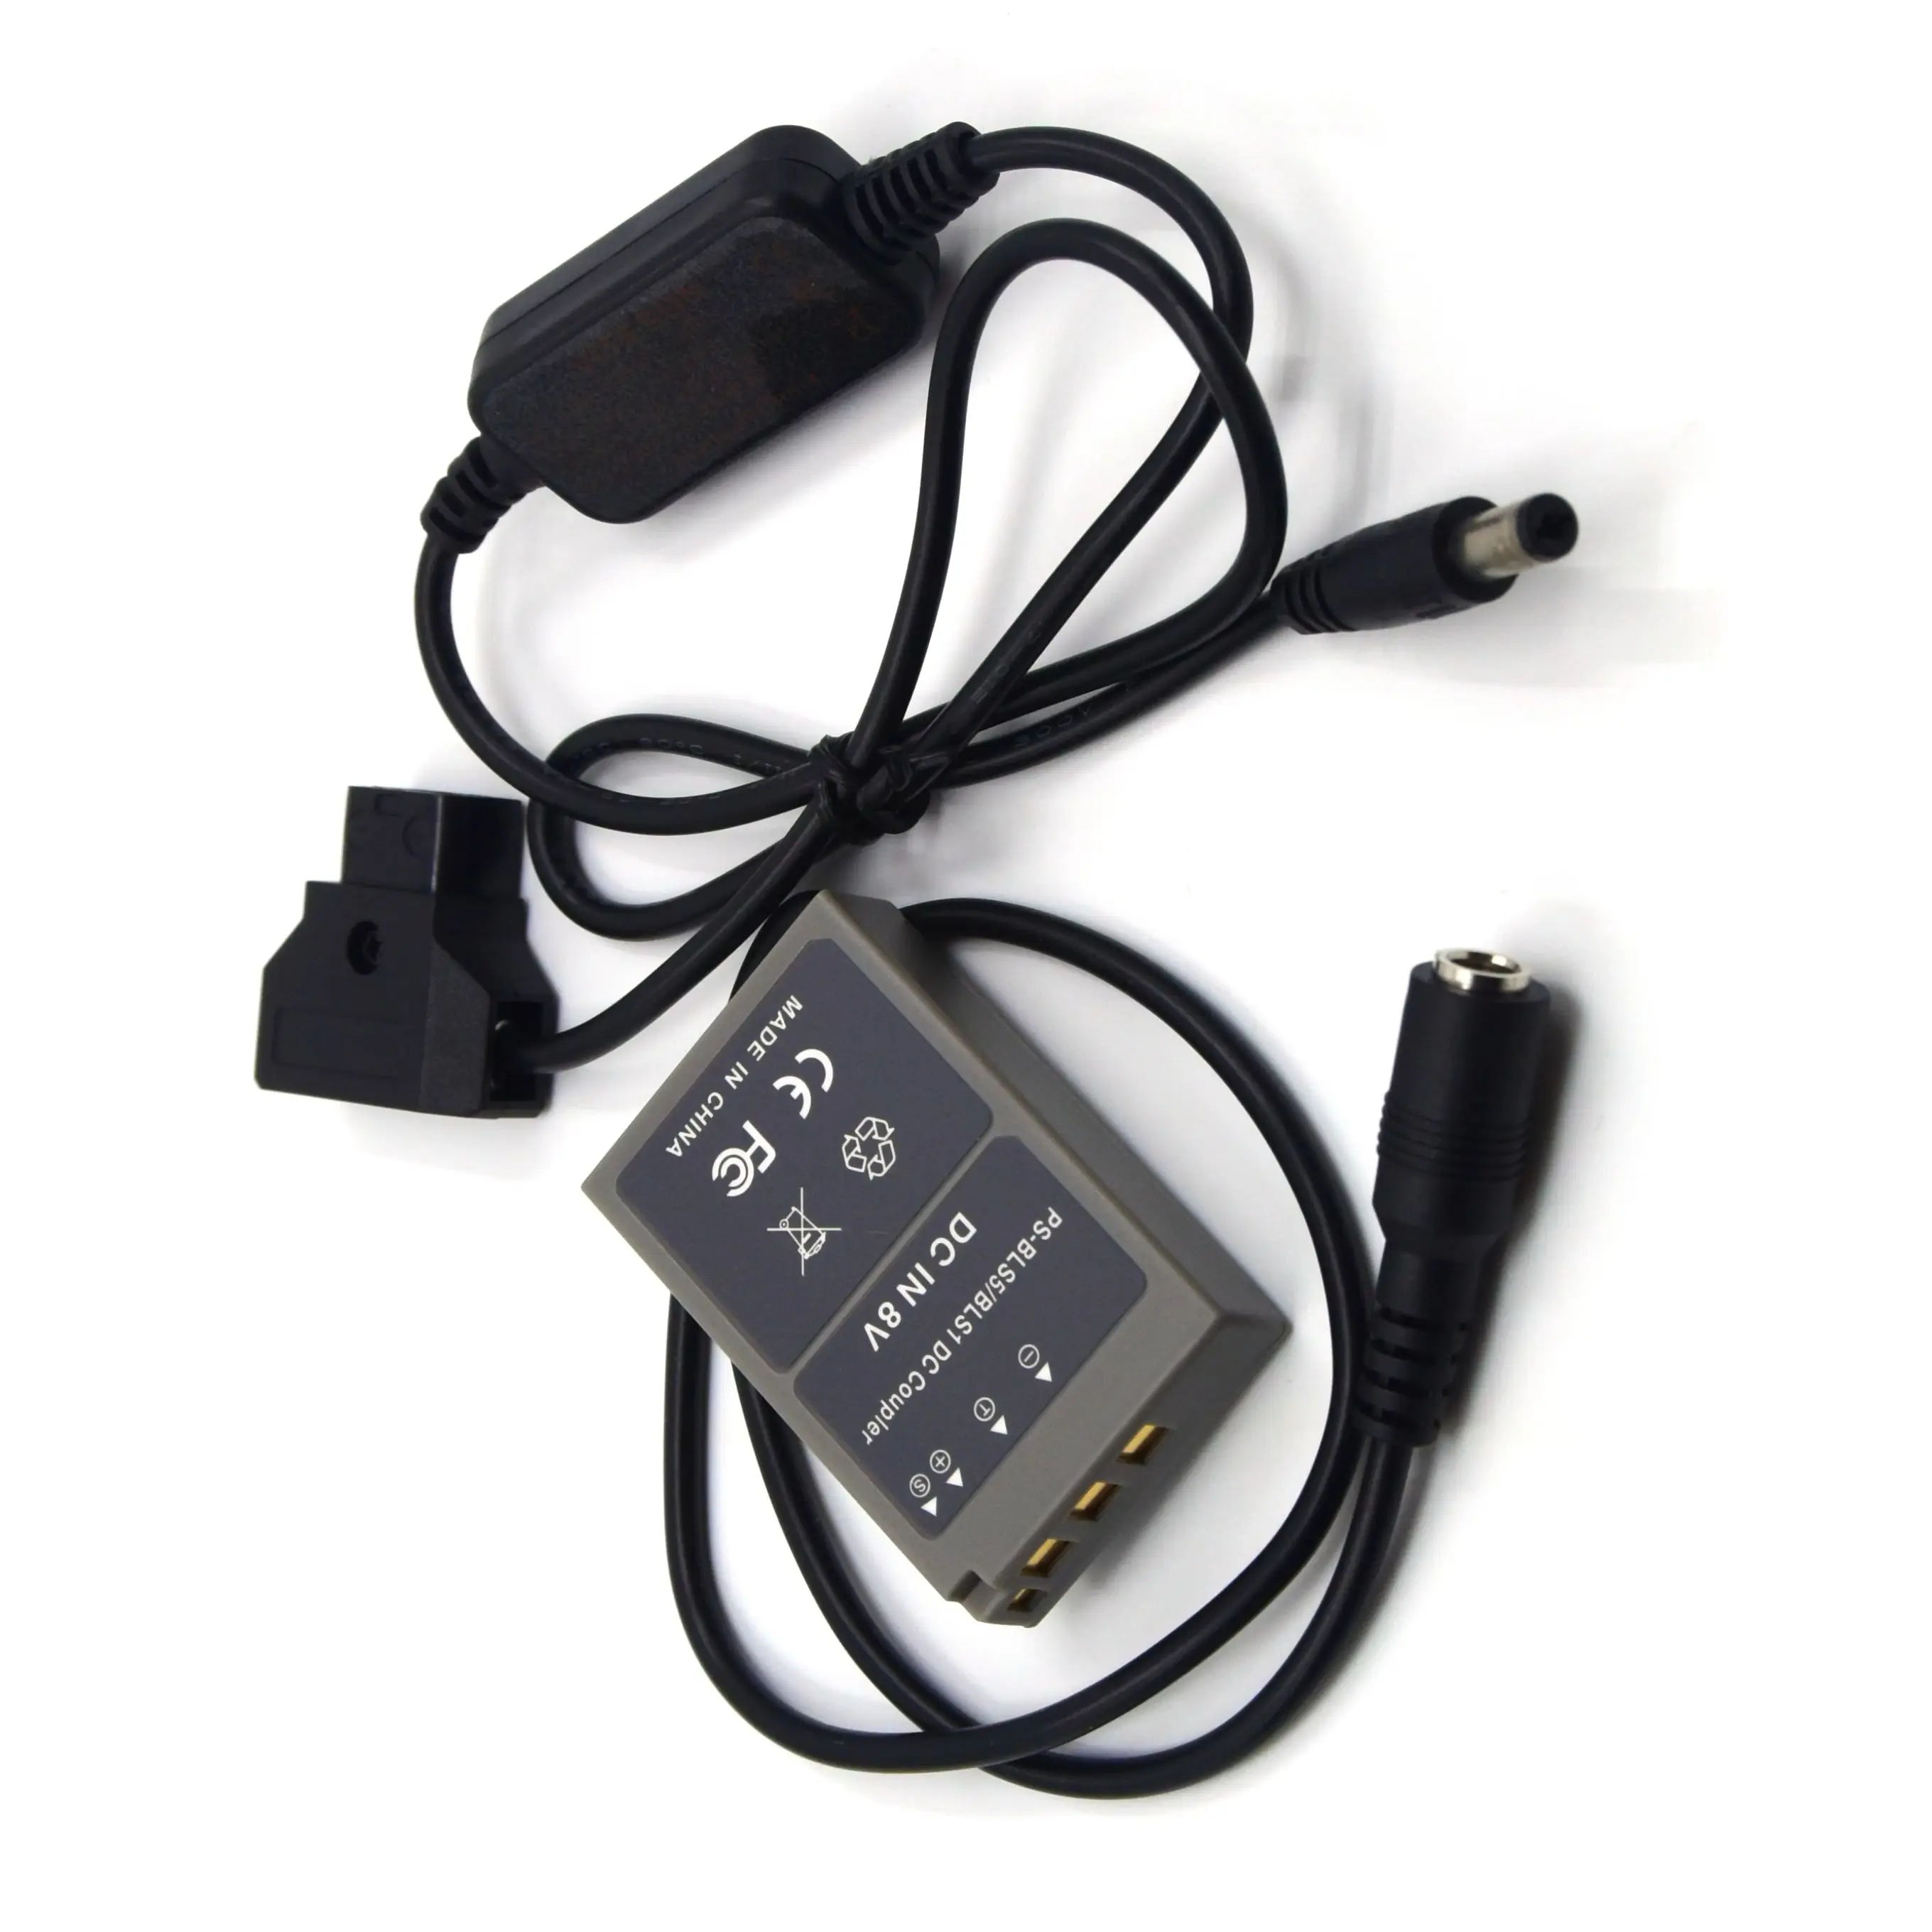 

PS-BLS-5 BLS5 Dummy Battery+D-Tap Power Cable For Olympus PEN E-PL7 E-PL5 E-PM2 Stylus 1 1s OM-D E-M10 EM10 Mark II III Camera